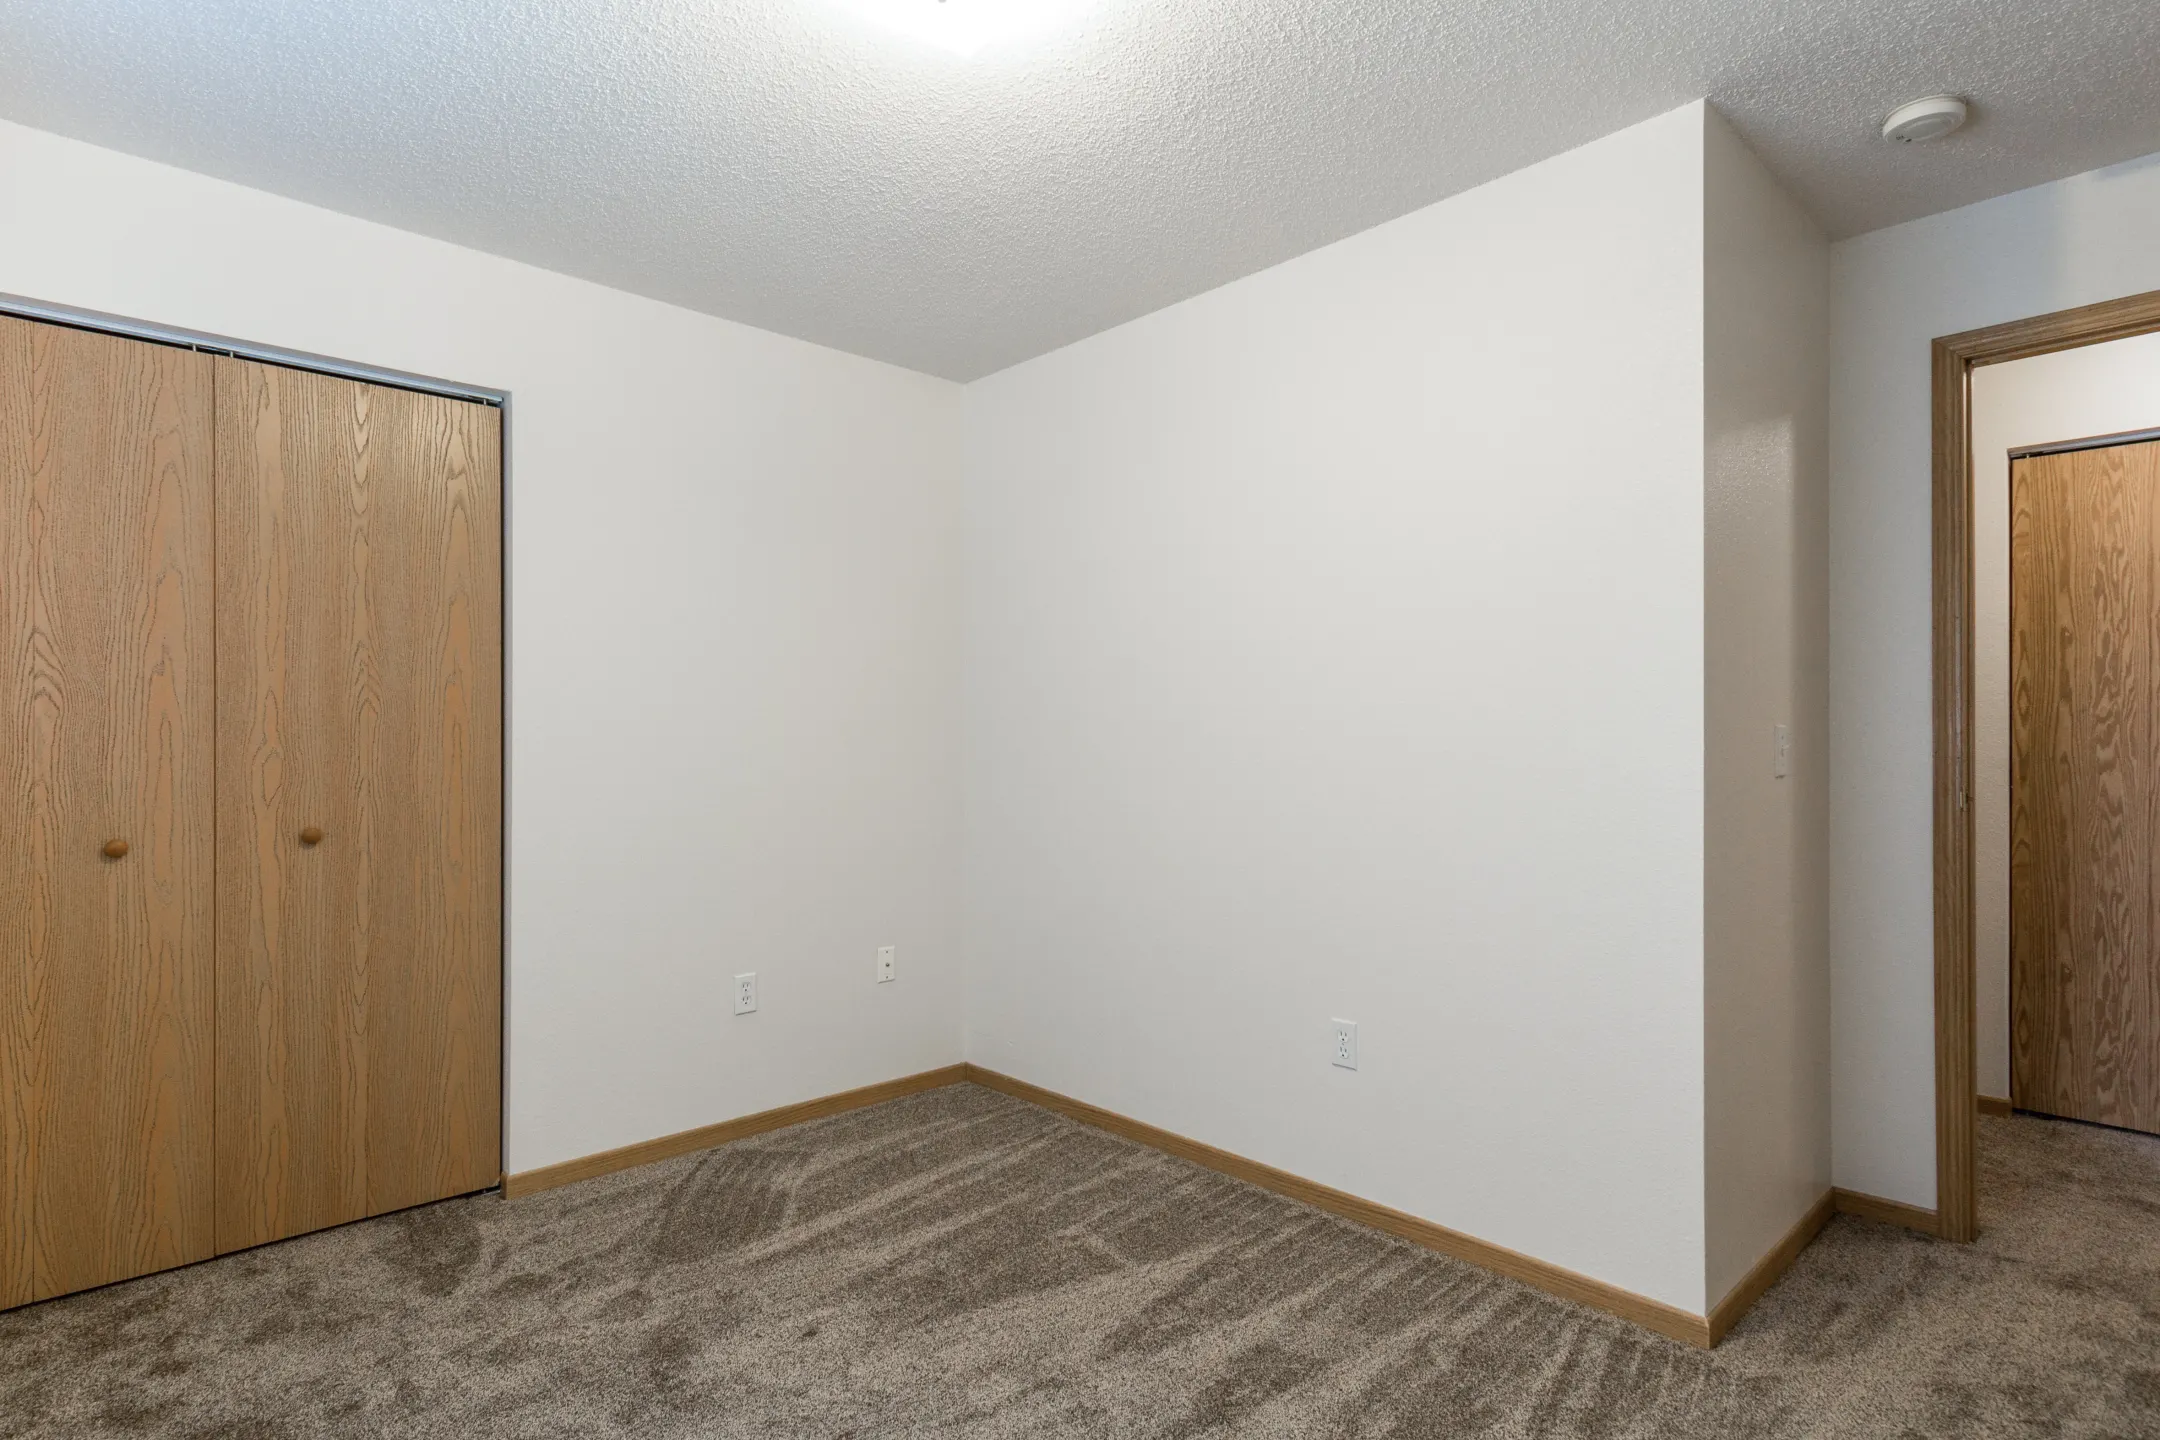 Bedroom - Wheatland Place Apartments & Townhomes - Fargo, ND